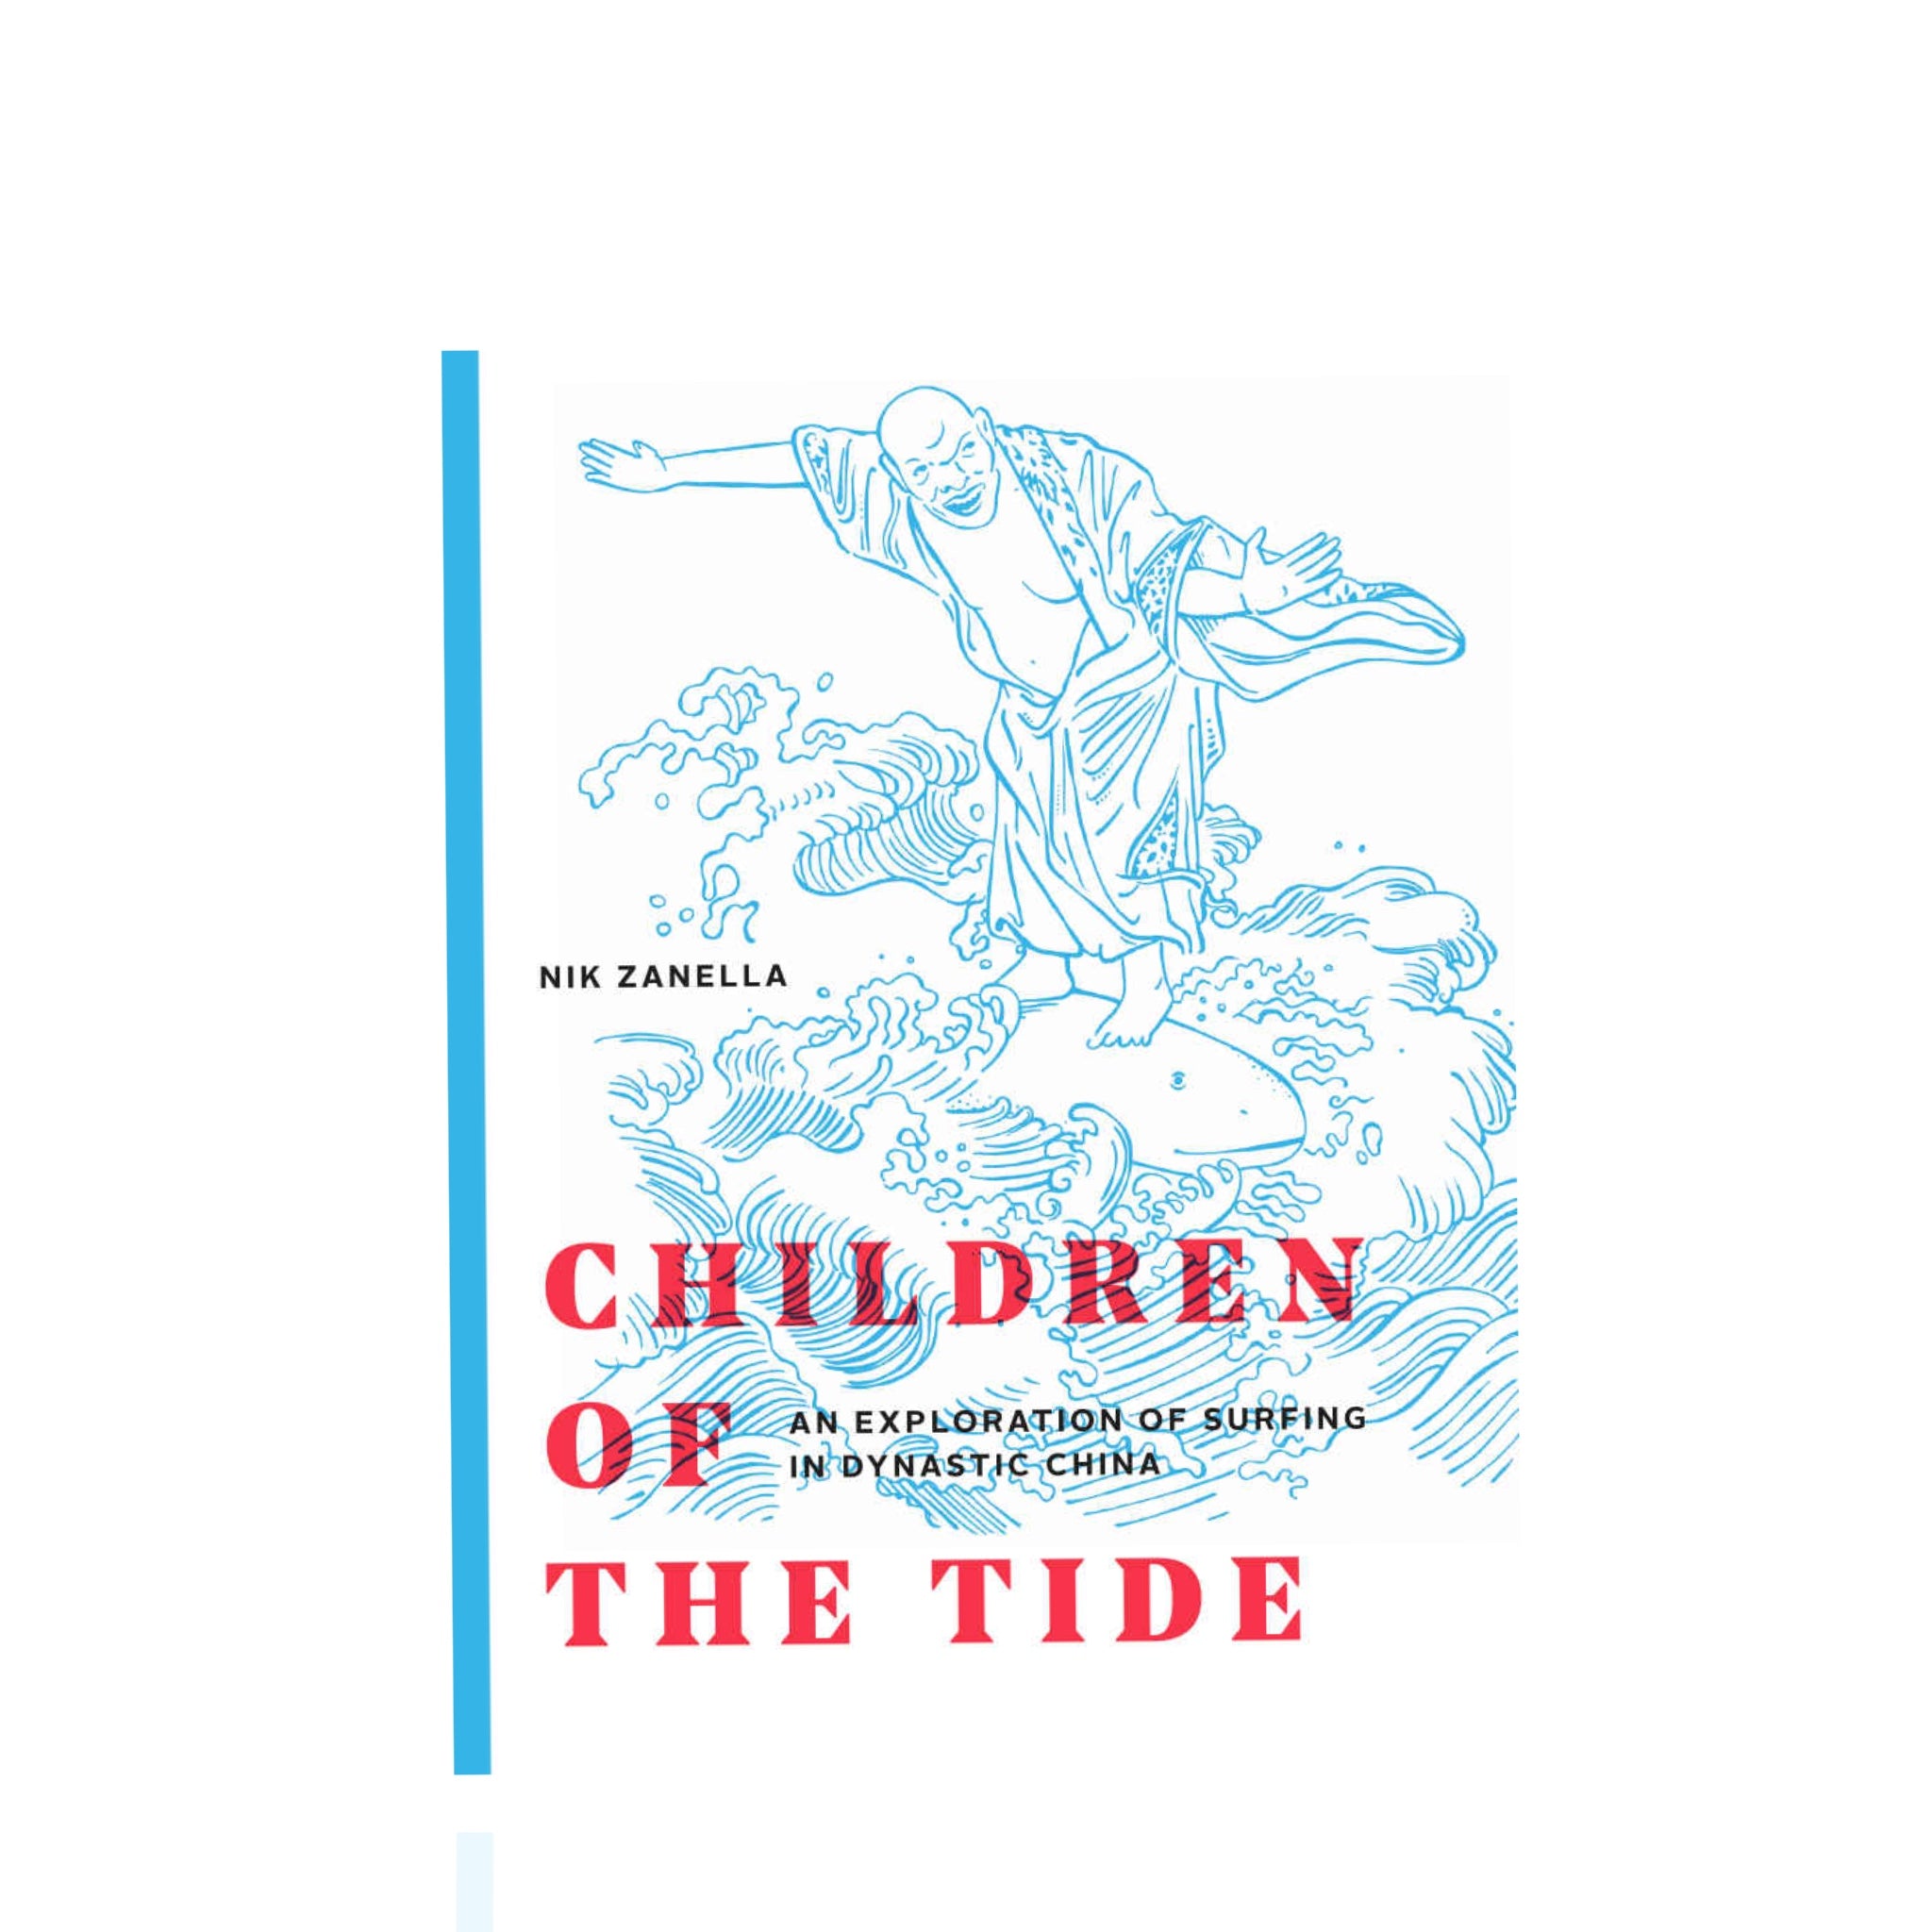 Children of the tide: An exploration of surfing in Dynastic China